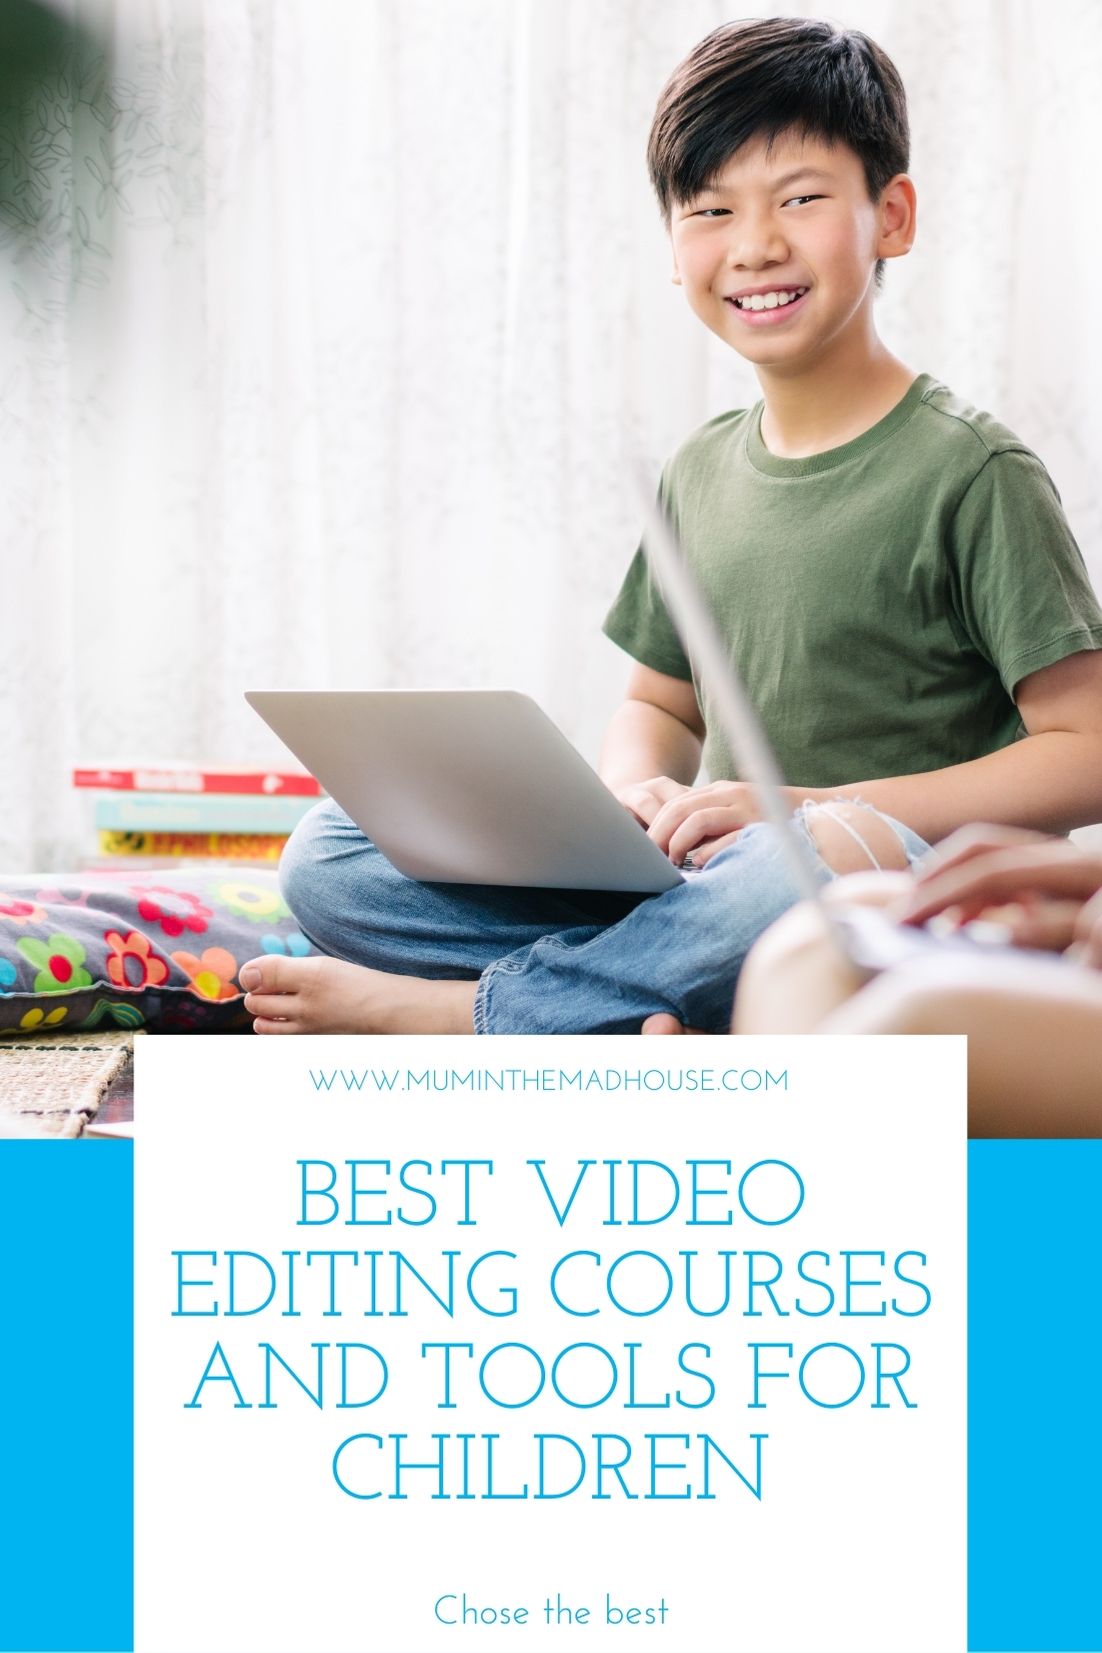 If your youngster has creative potential and is interested in video shooting or editing, then you need to nurture the talent. Check top courses and apps that will help you achieve this goal.